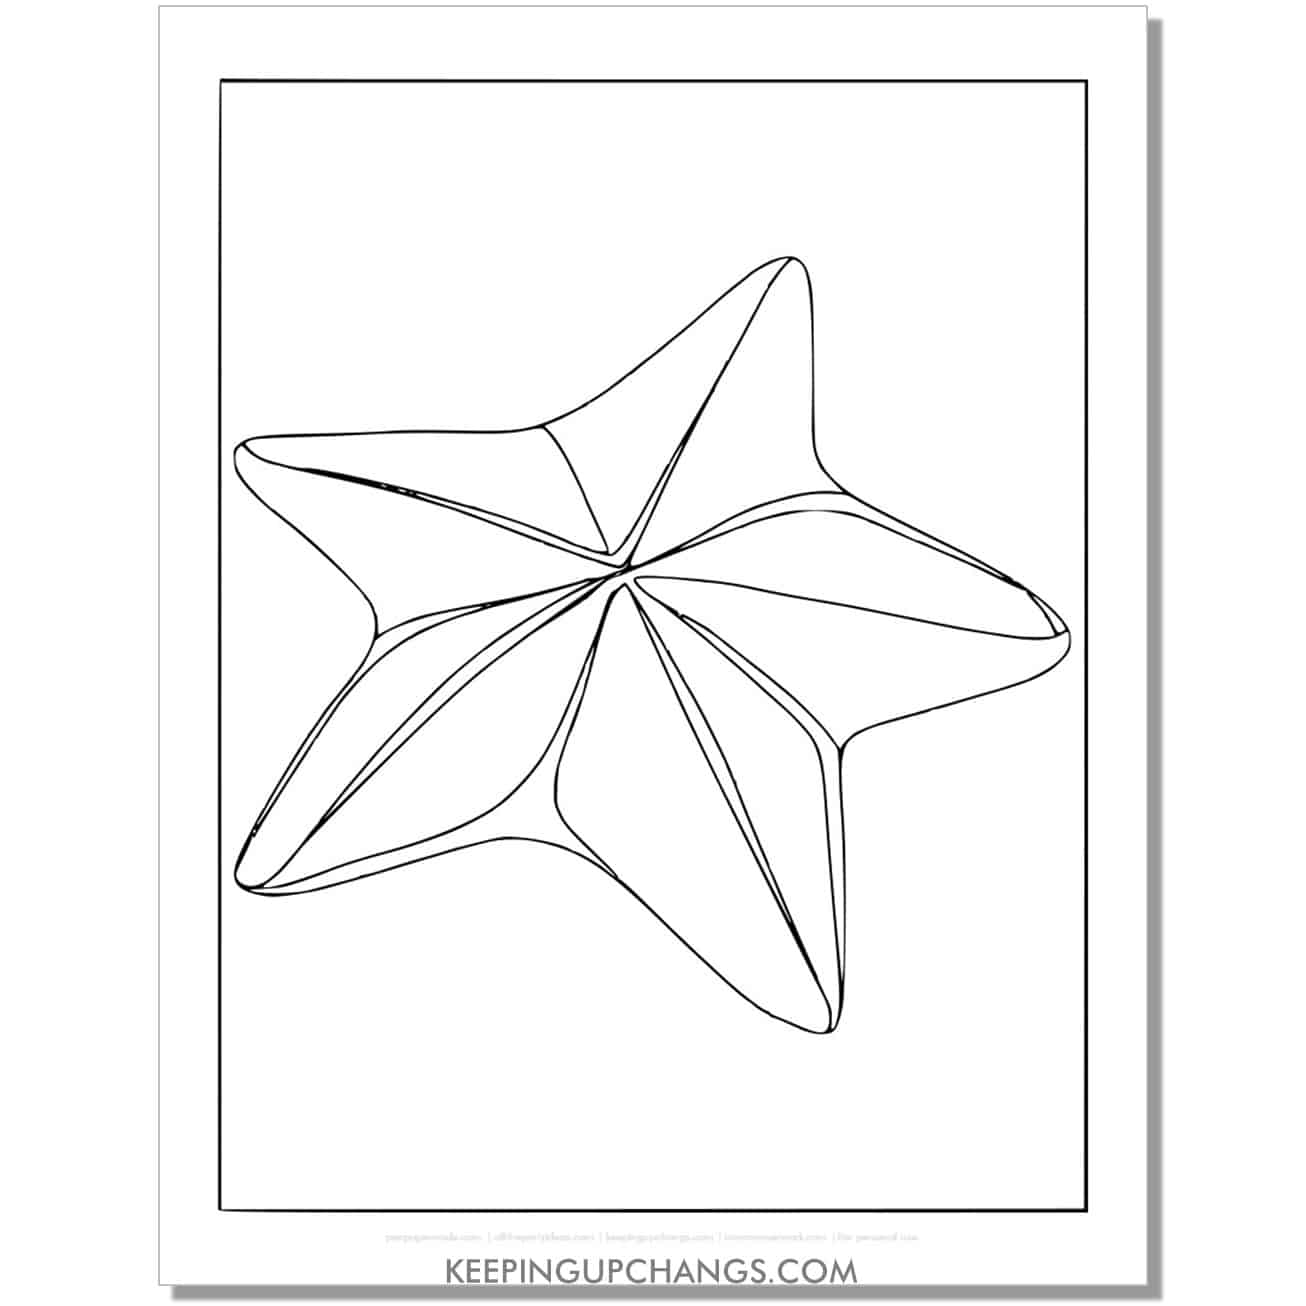 free easy, simple sea star, starfish coloring page, sheet.